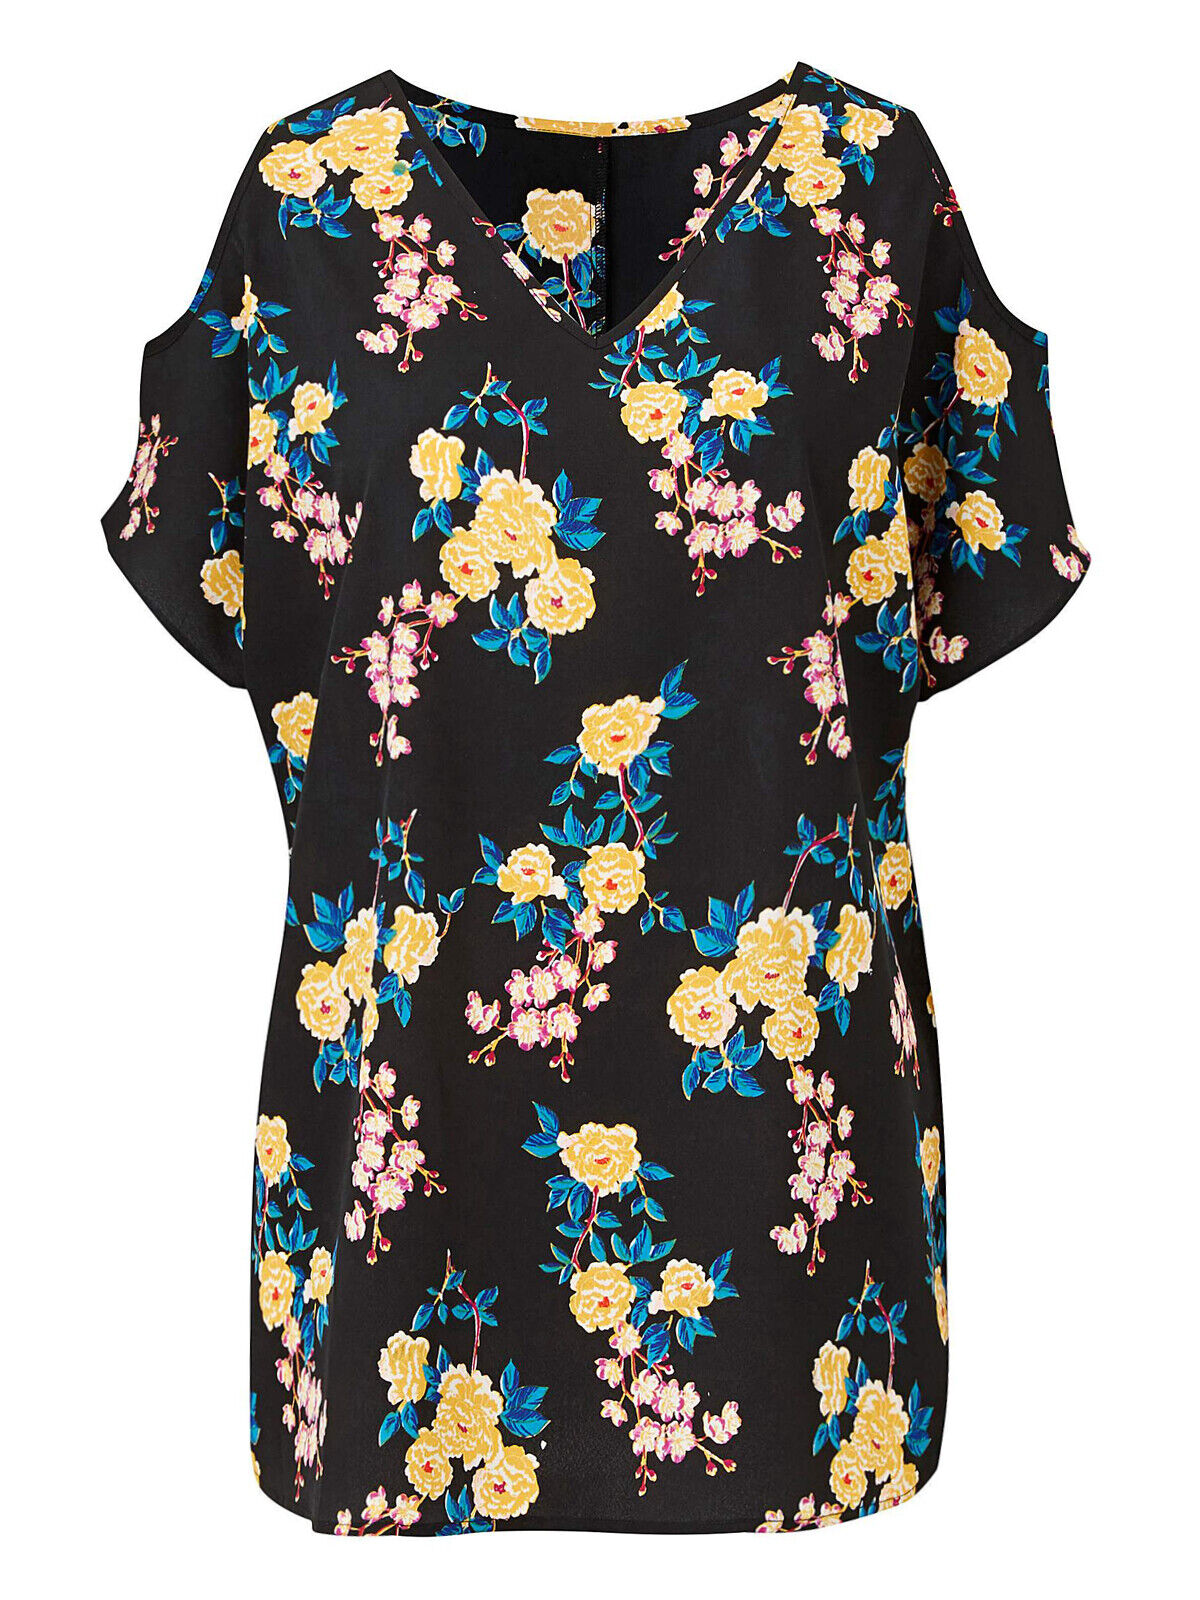 New Julipa Black Floral Print Cold Shoulder Blouse Top in Sizes 12 or 14